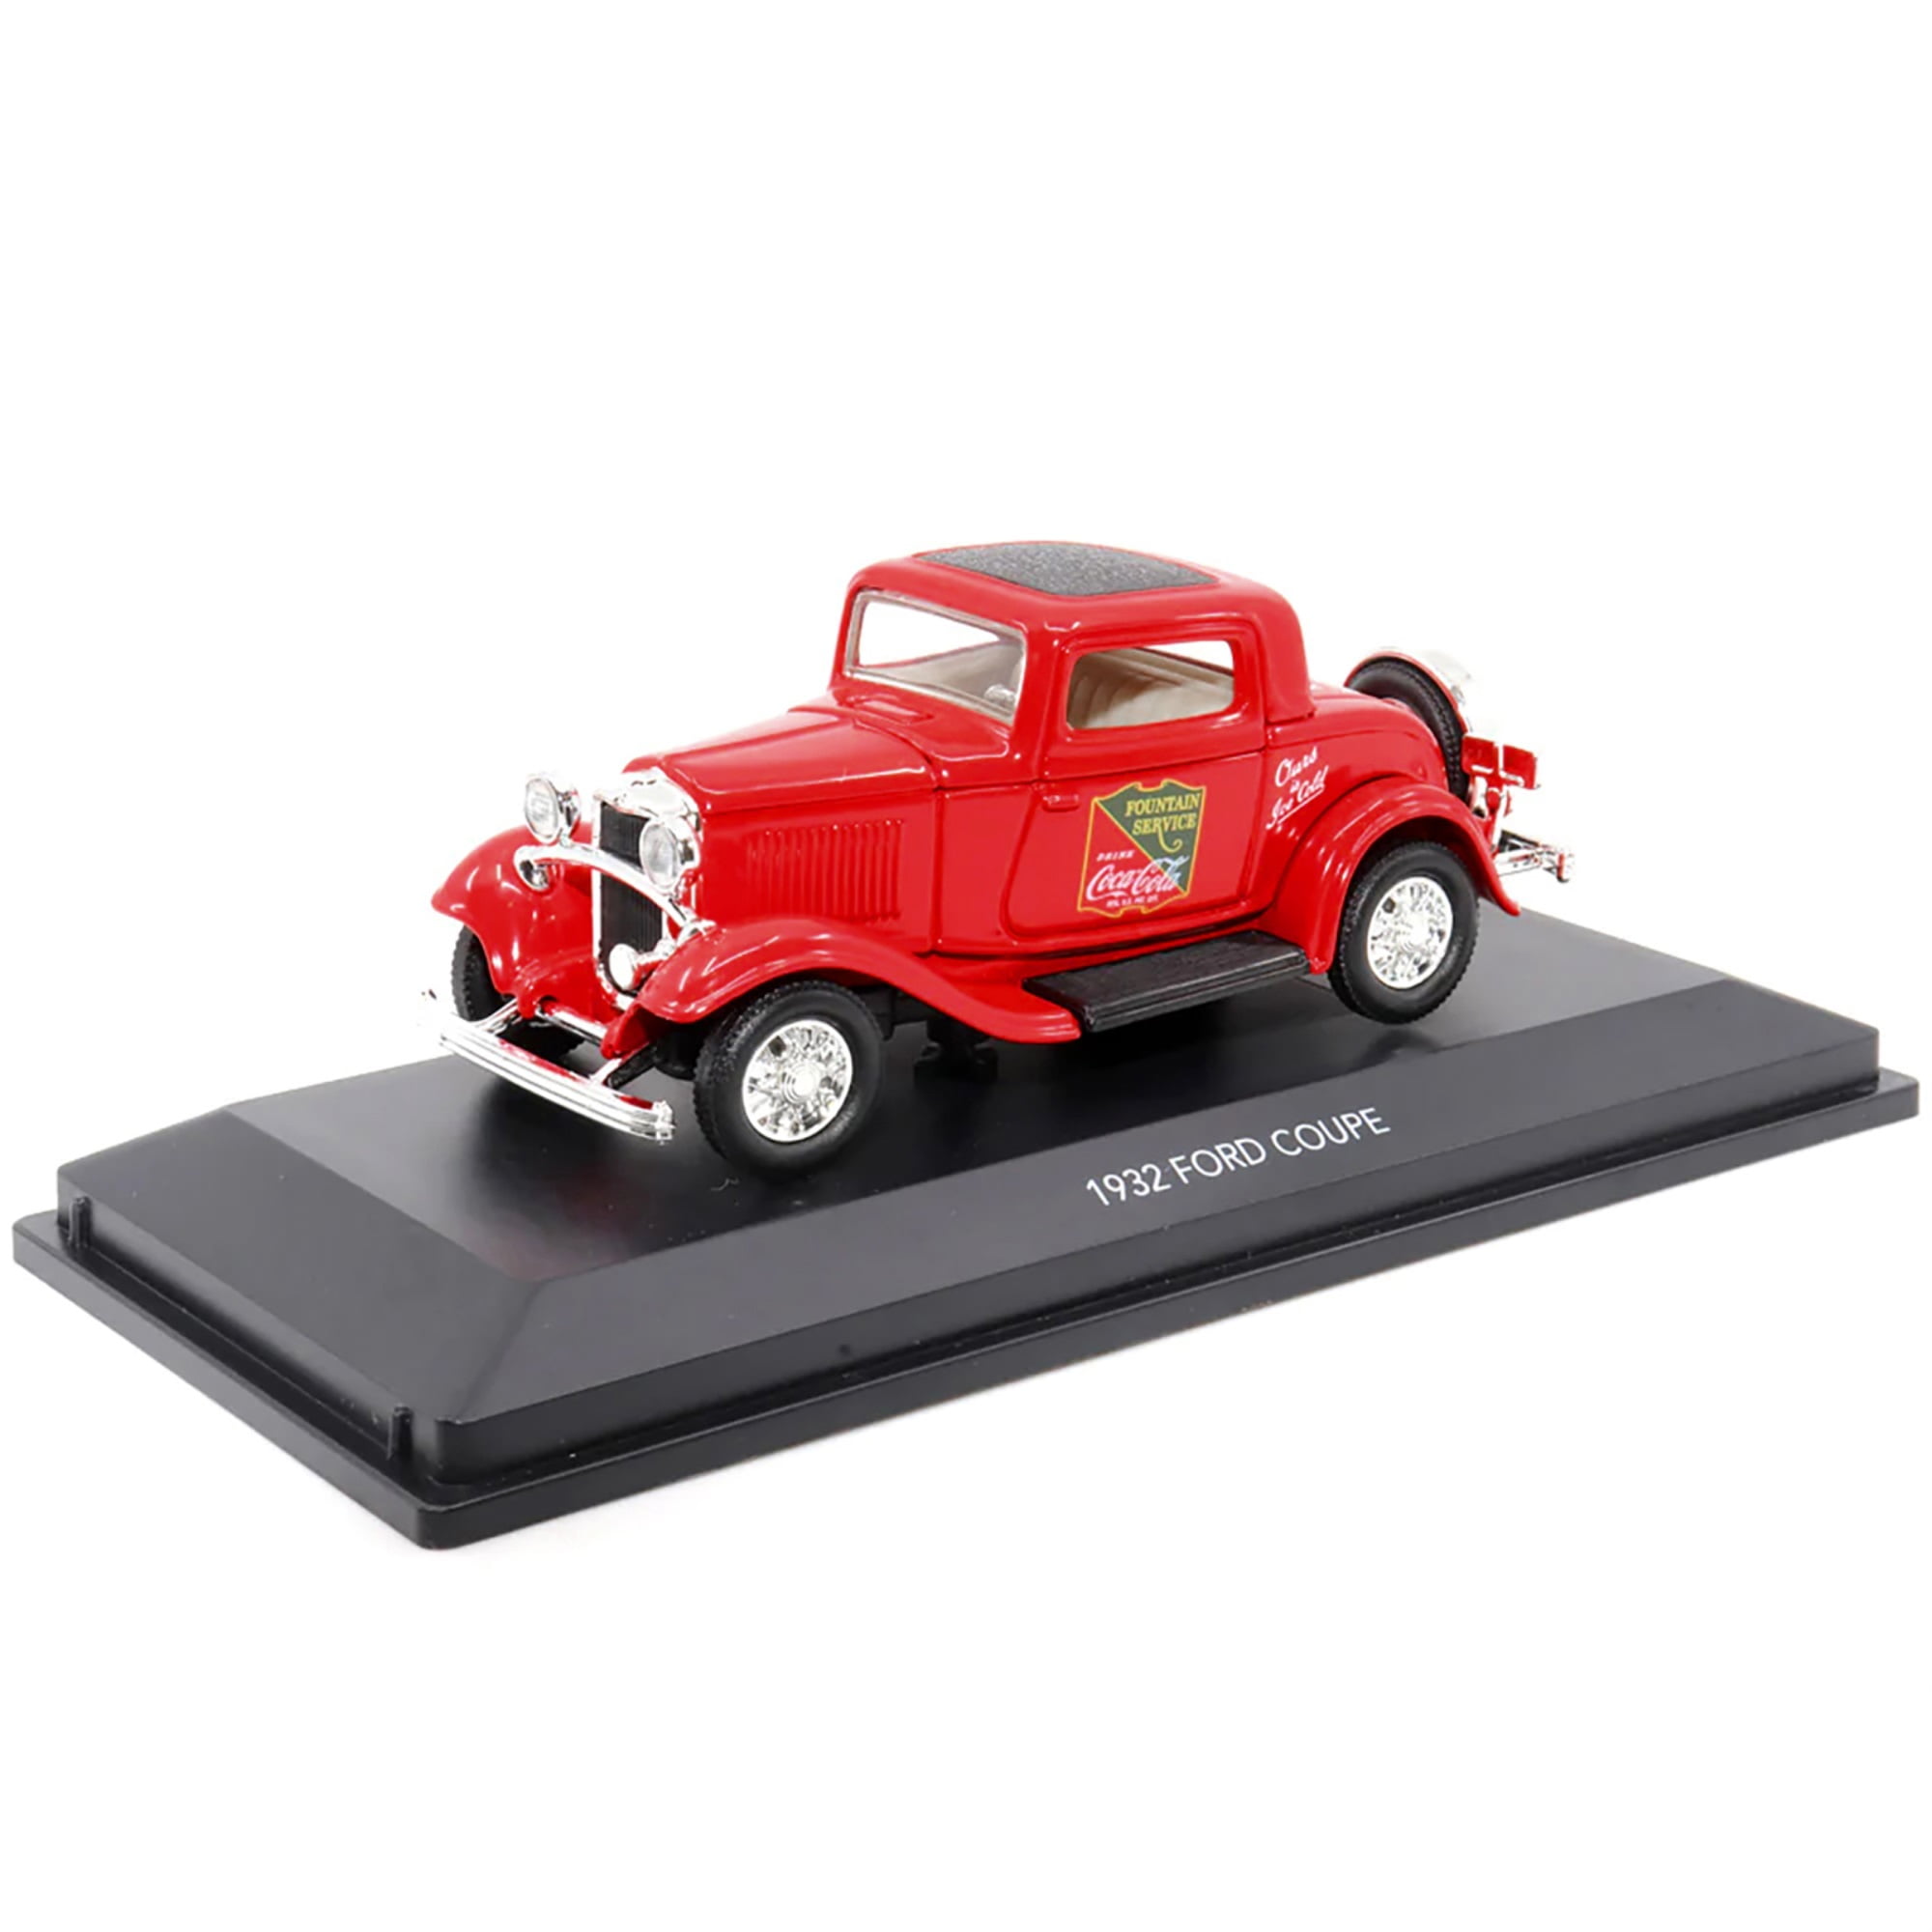 Motorcity Classics 443030 1932 Ford Coupe Coca-Cola Red with Black Top 1 by 43 Scale Diecast Model Car -  MOTOR CITY CLASSICS